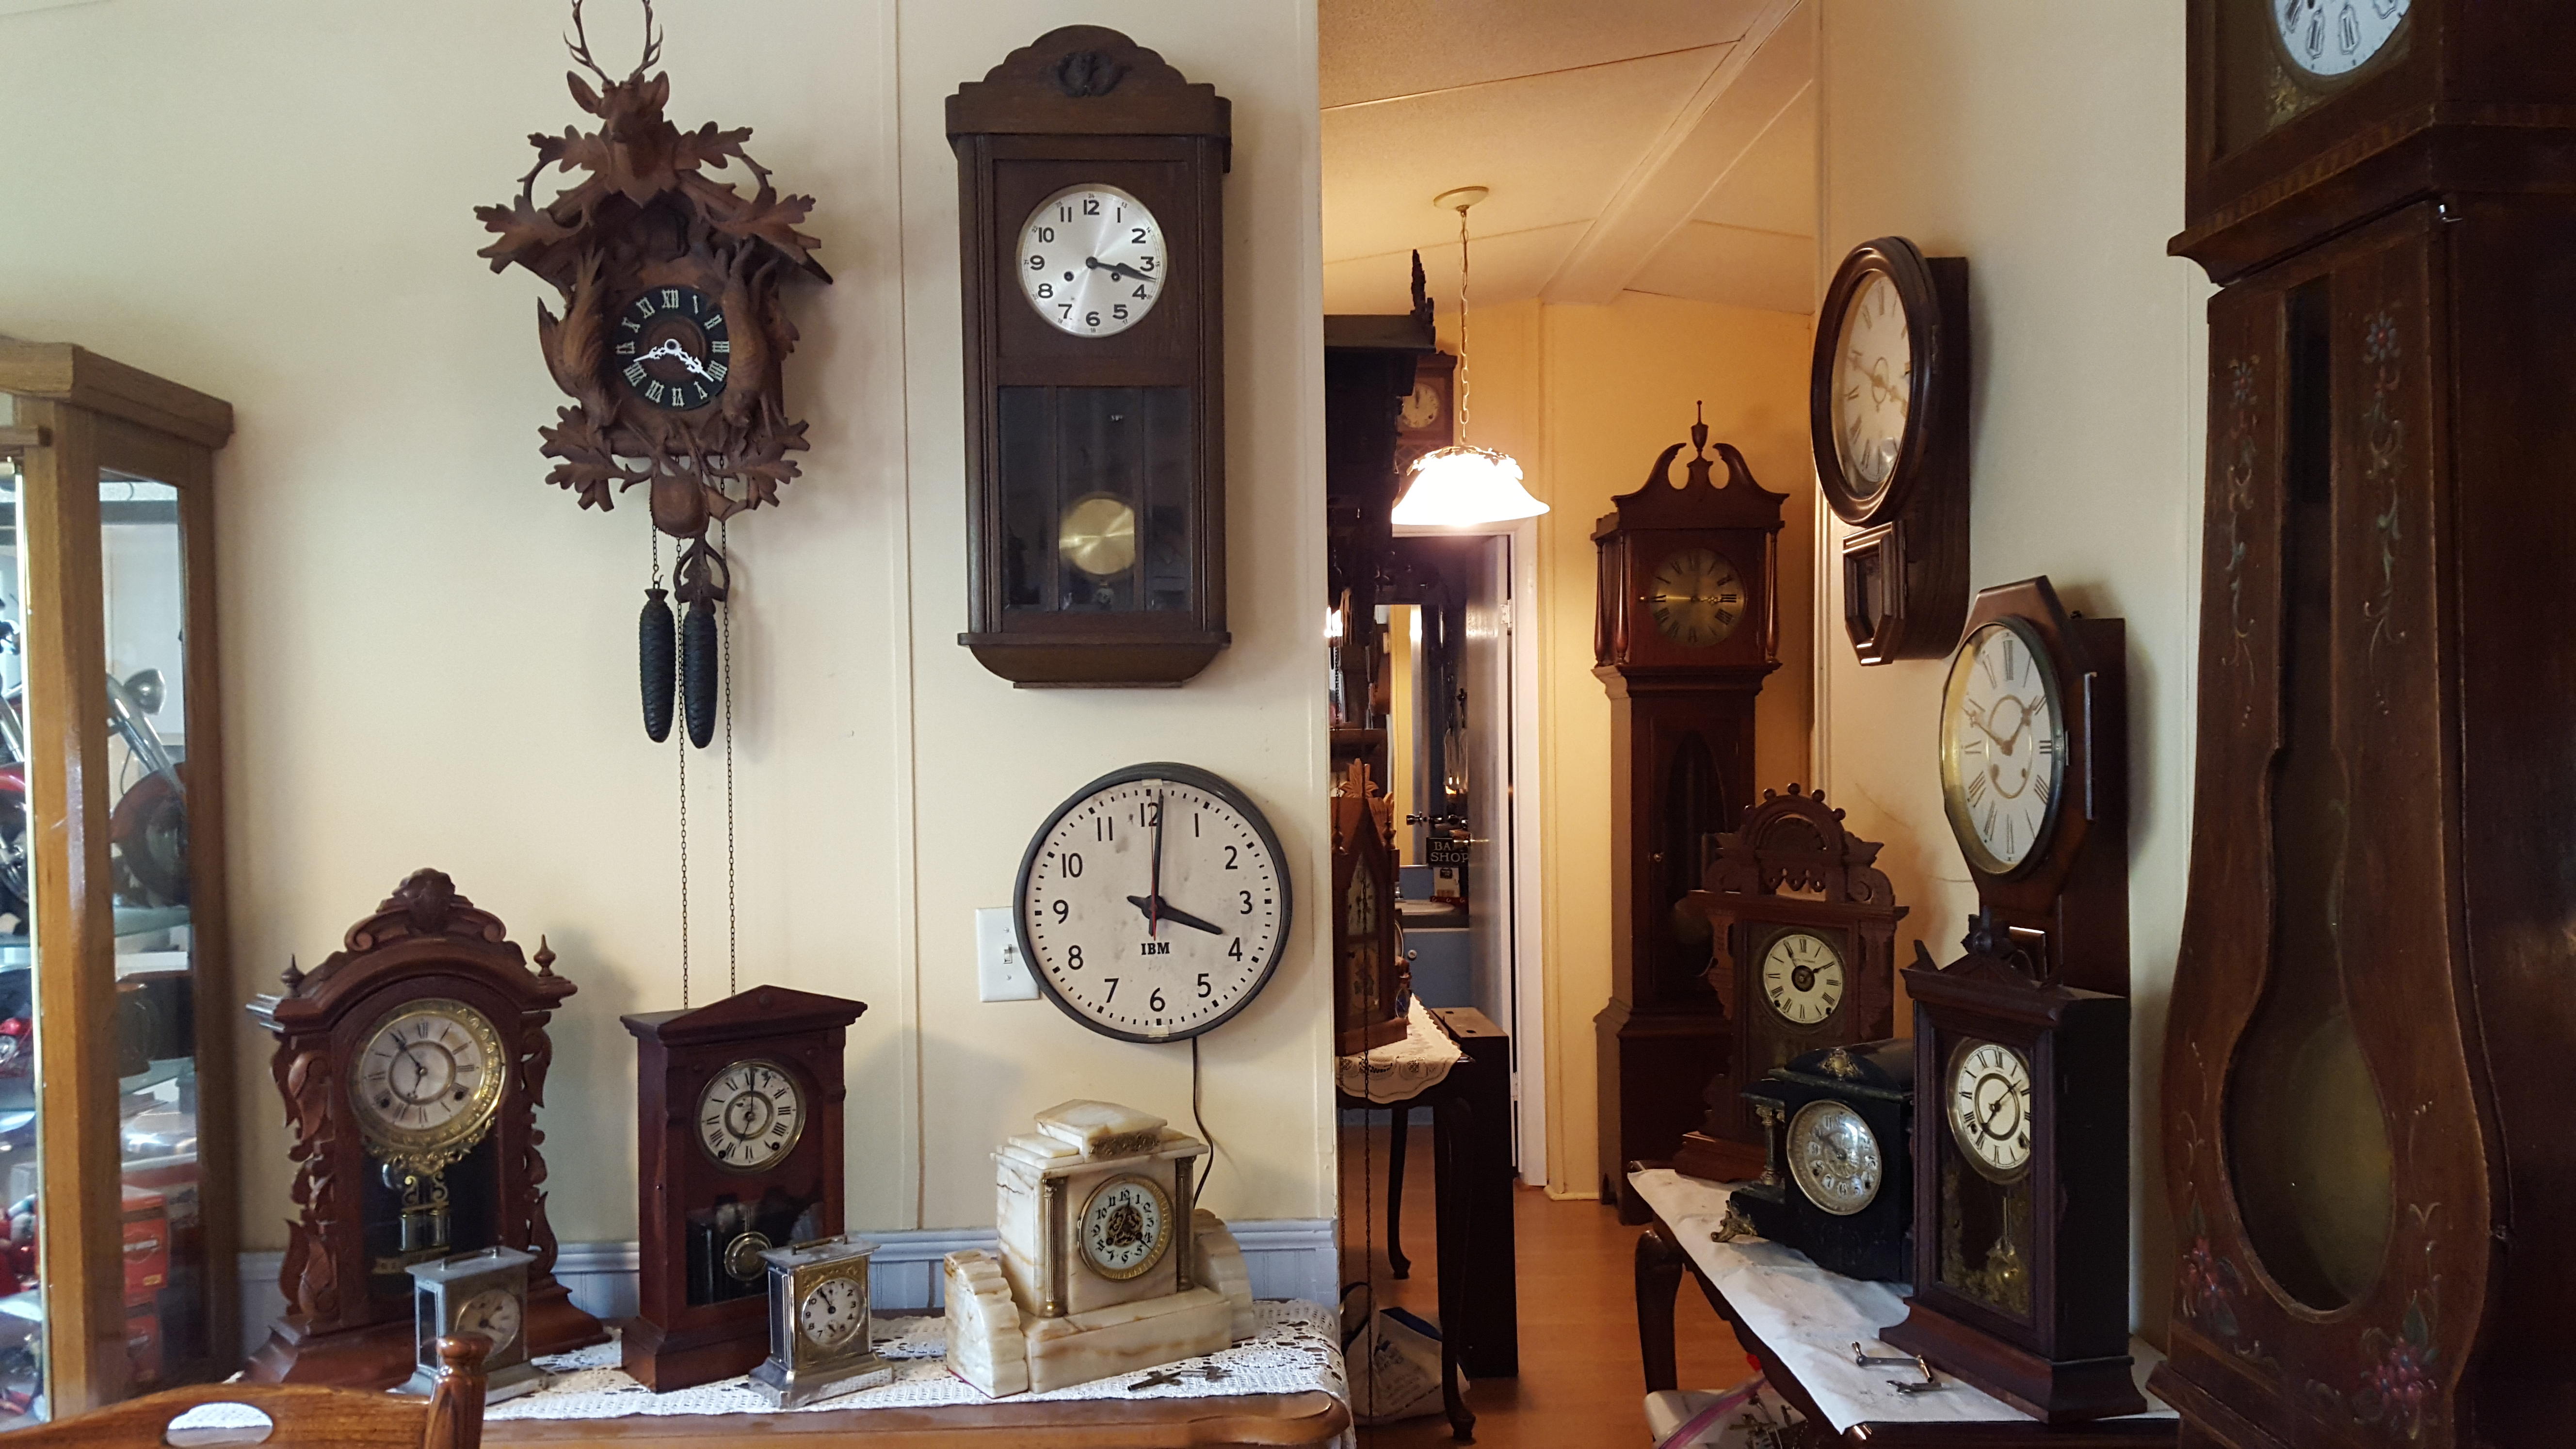 Captain Mike's Clock Shop Coupons near me in Charleston, SC 29407 | 8coupons